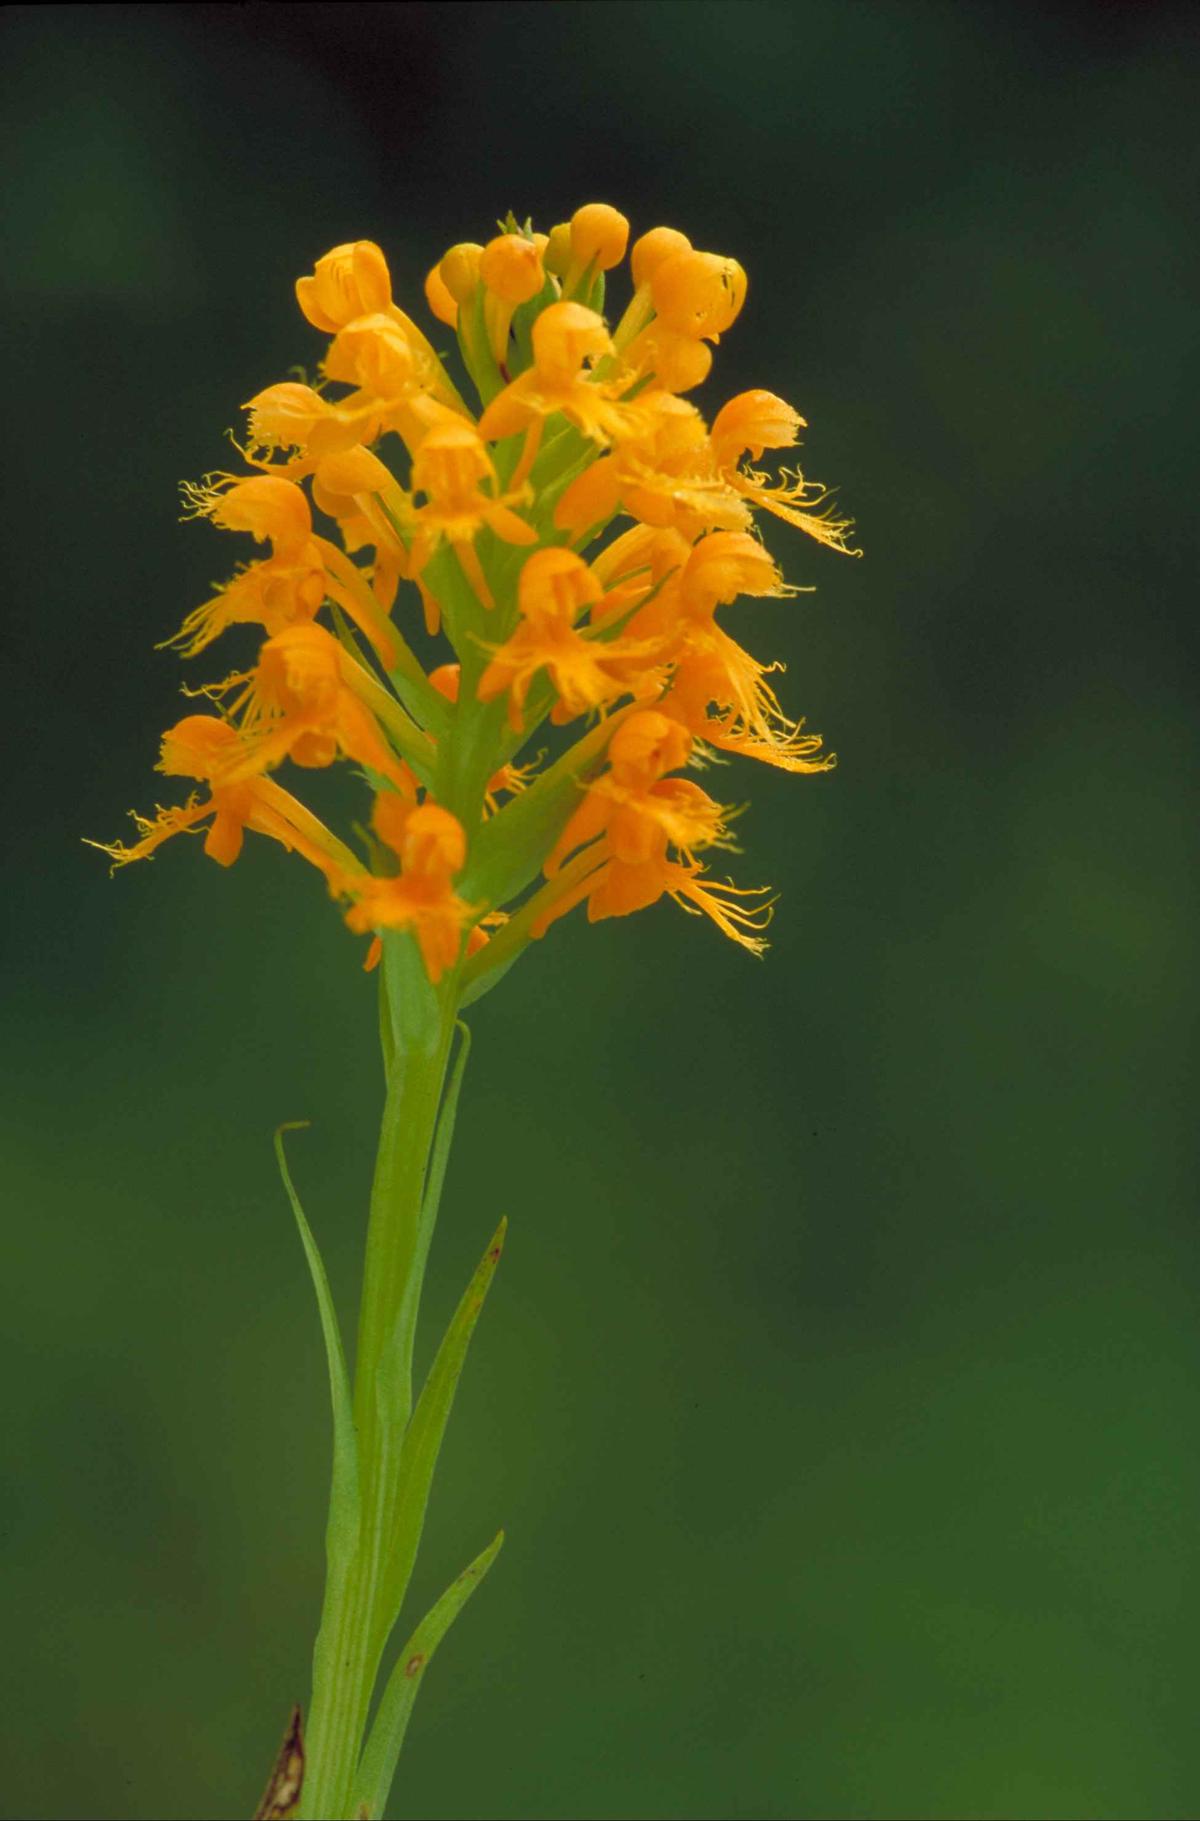 The orange-yellow crested fringed orchid, platanthera cristata (<a href="https://commons.wikimedia.org/wiki/File:Orange_yellow_crested_orchid_platanthera_cristata_blossoms_on_stem.jpg#/media/File:Orange_yellow_crested_orchid_platanthera_cristata_blossoms_on_stem.jpg">Dr. Thomas G. Barnes/U.S. Fish and Wildlife Service</a>)